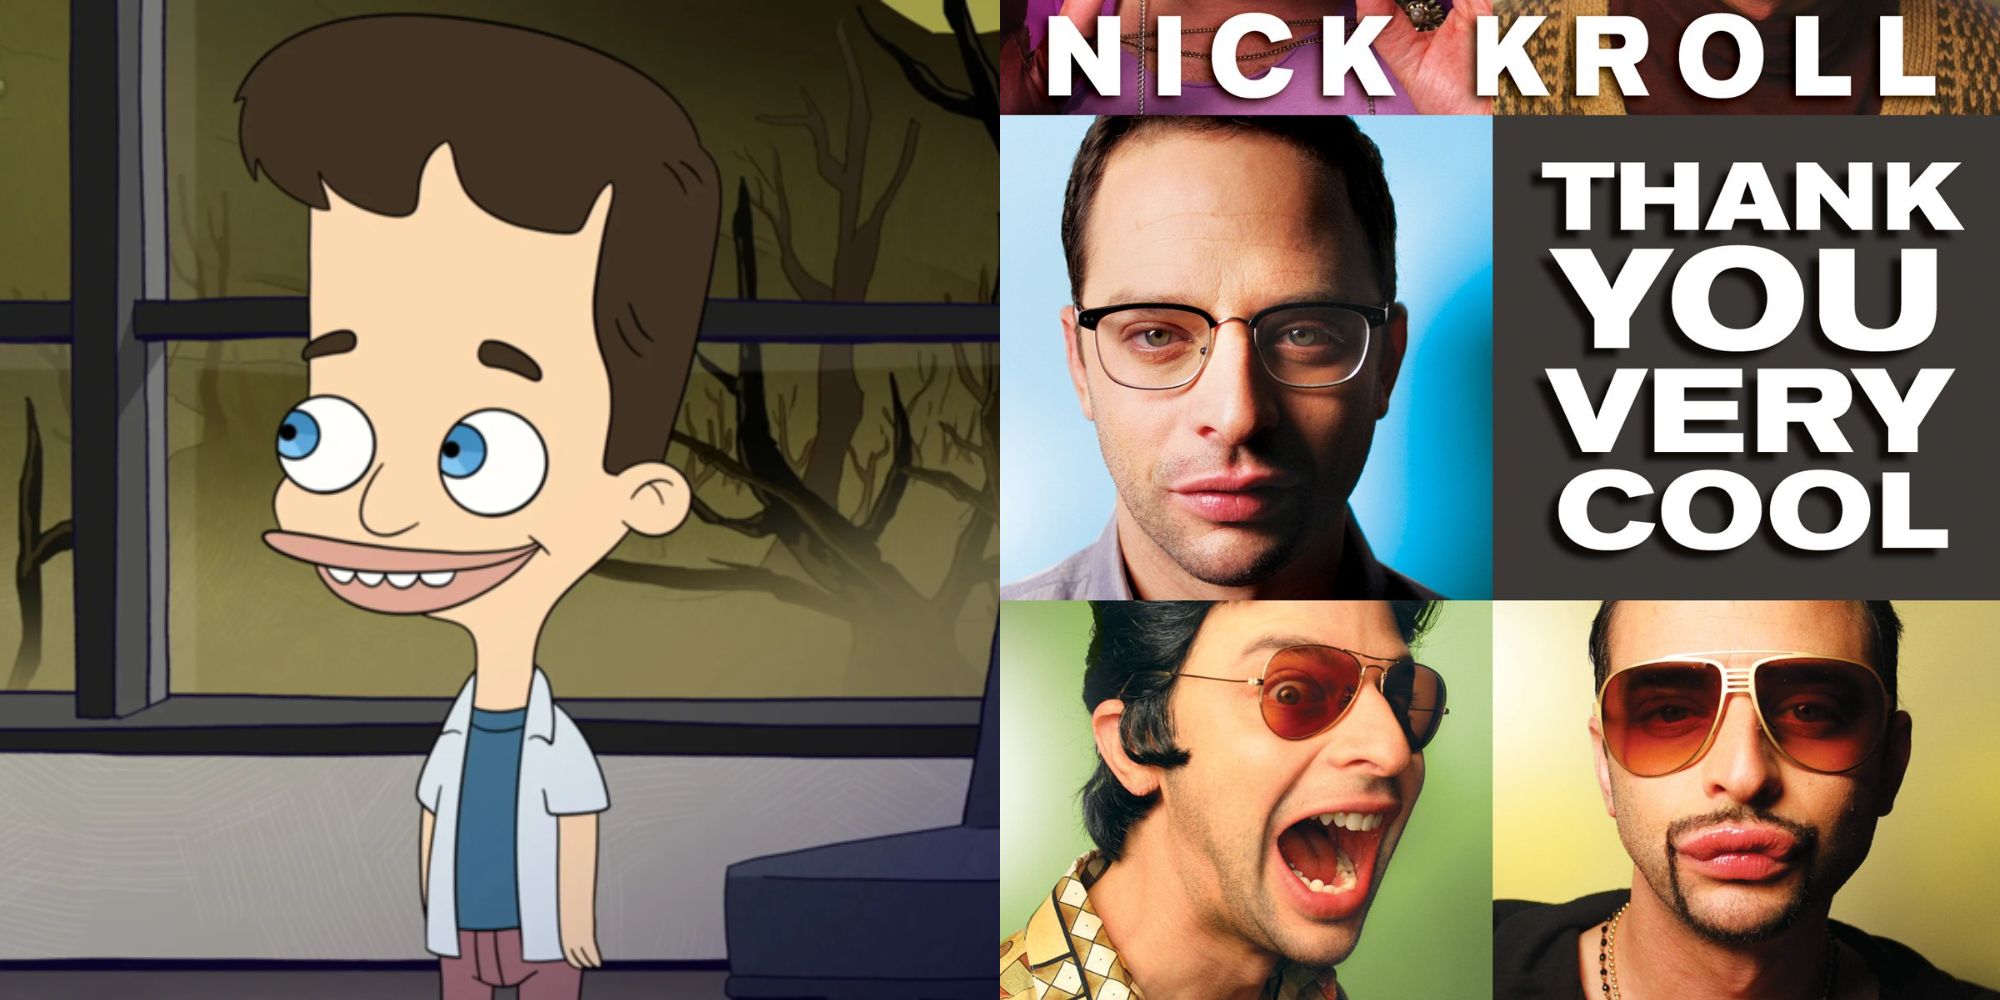 Split image showing Nick in Big Mouth and Nick Kroll in Thank You Very Cool.